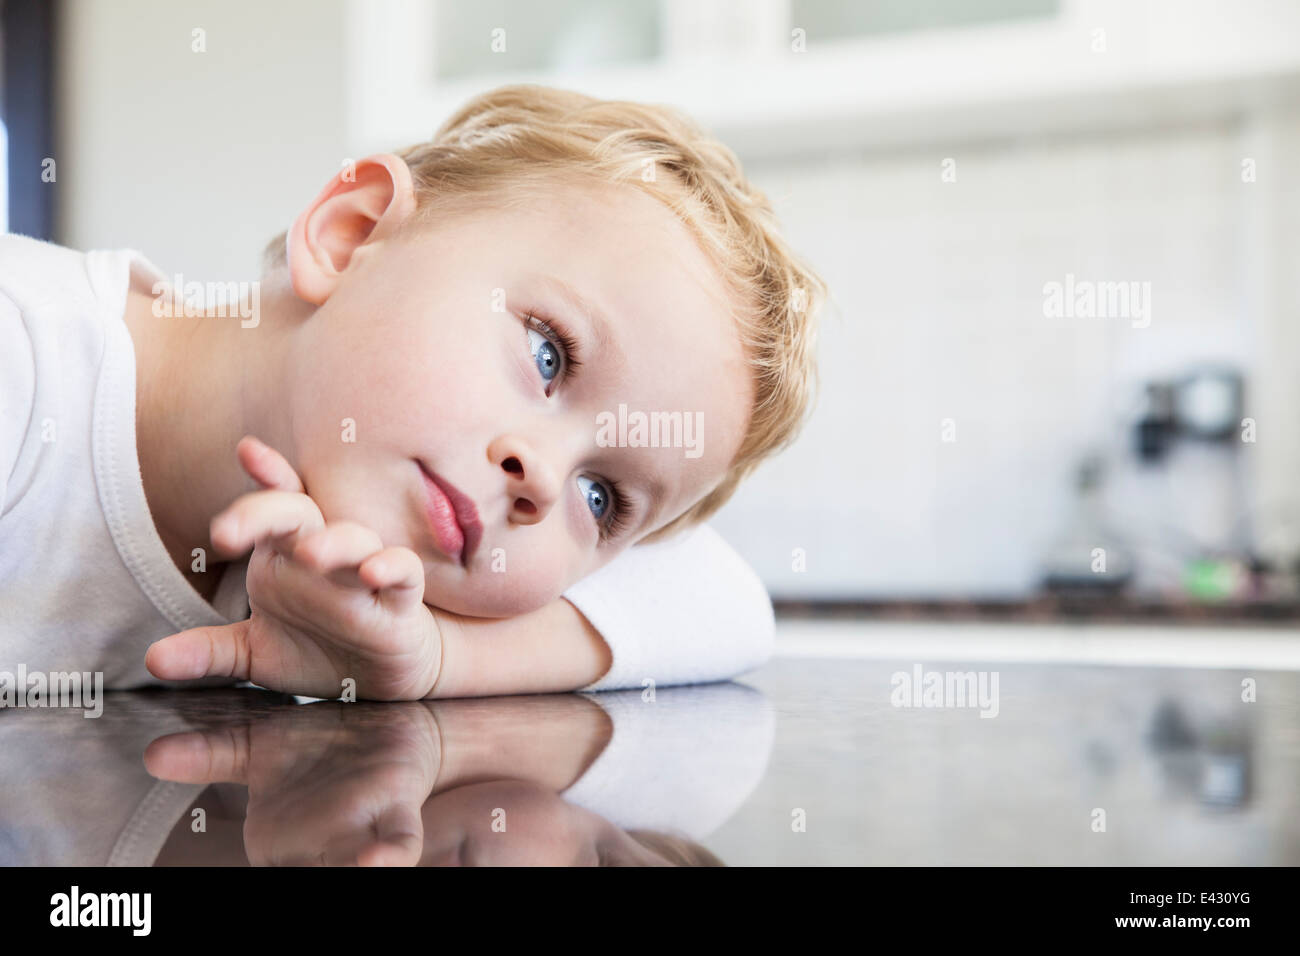 Portrait of three year old boy leaning on kitchen bench Stock Photo